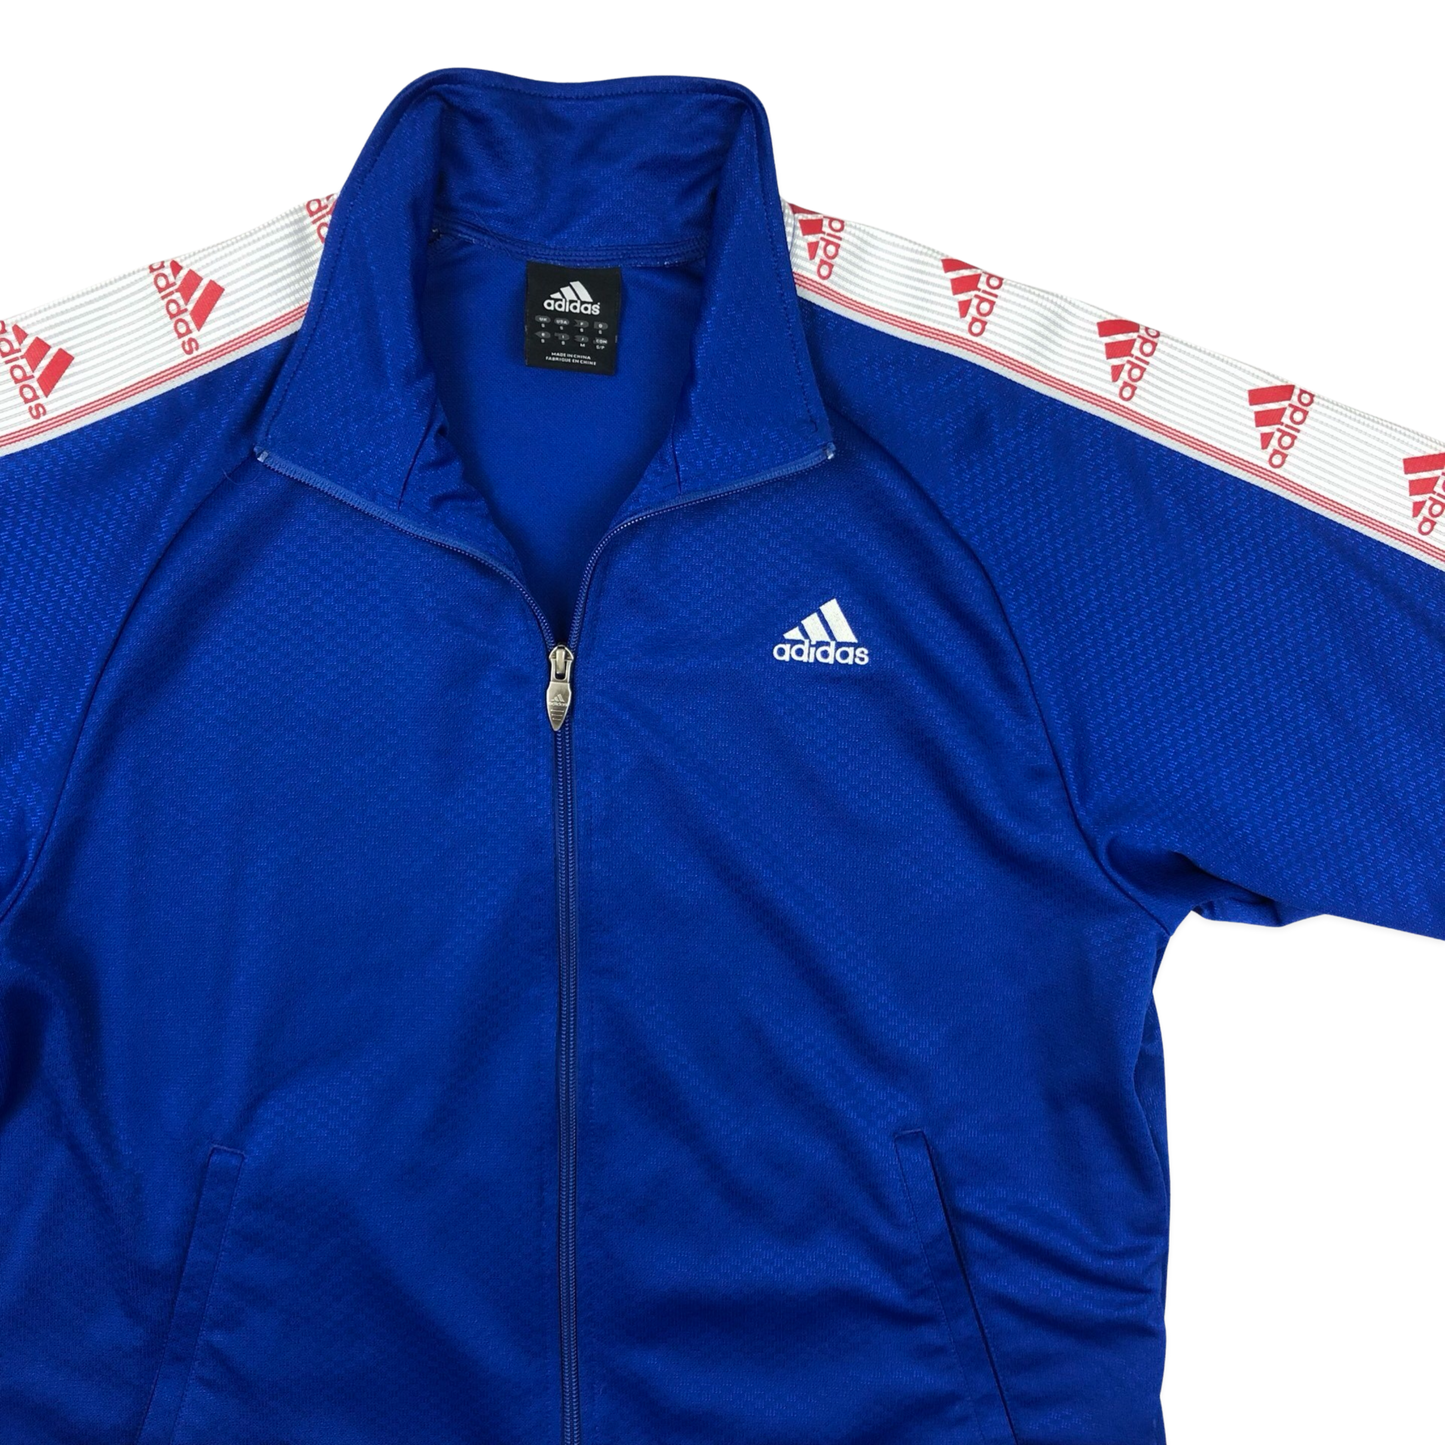 Vintage 00s Adidas Blue and White Track Jacket XL